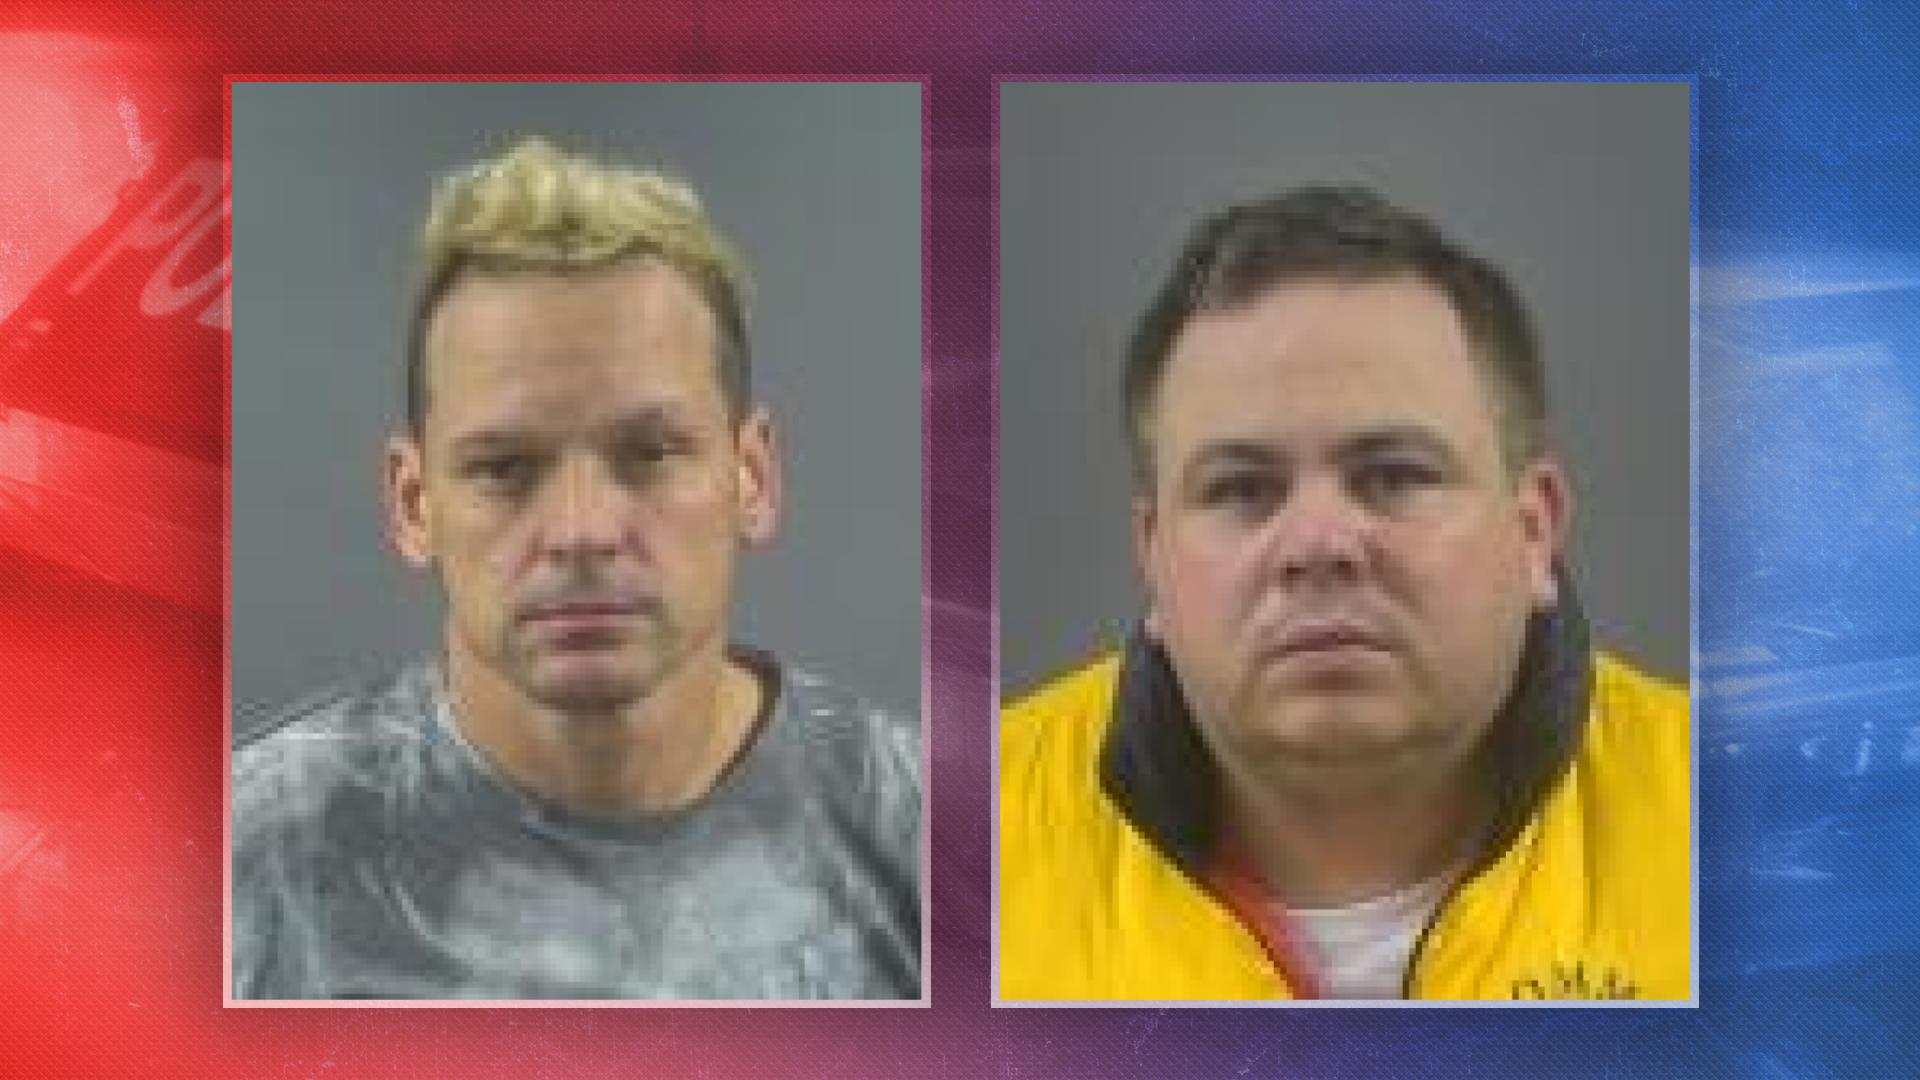 Two inmates accused of escaping Allen County Sheriff's custody, with